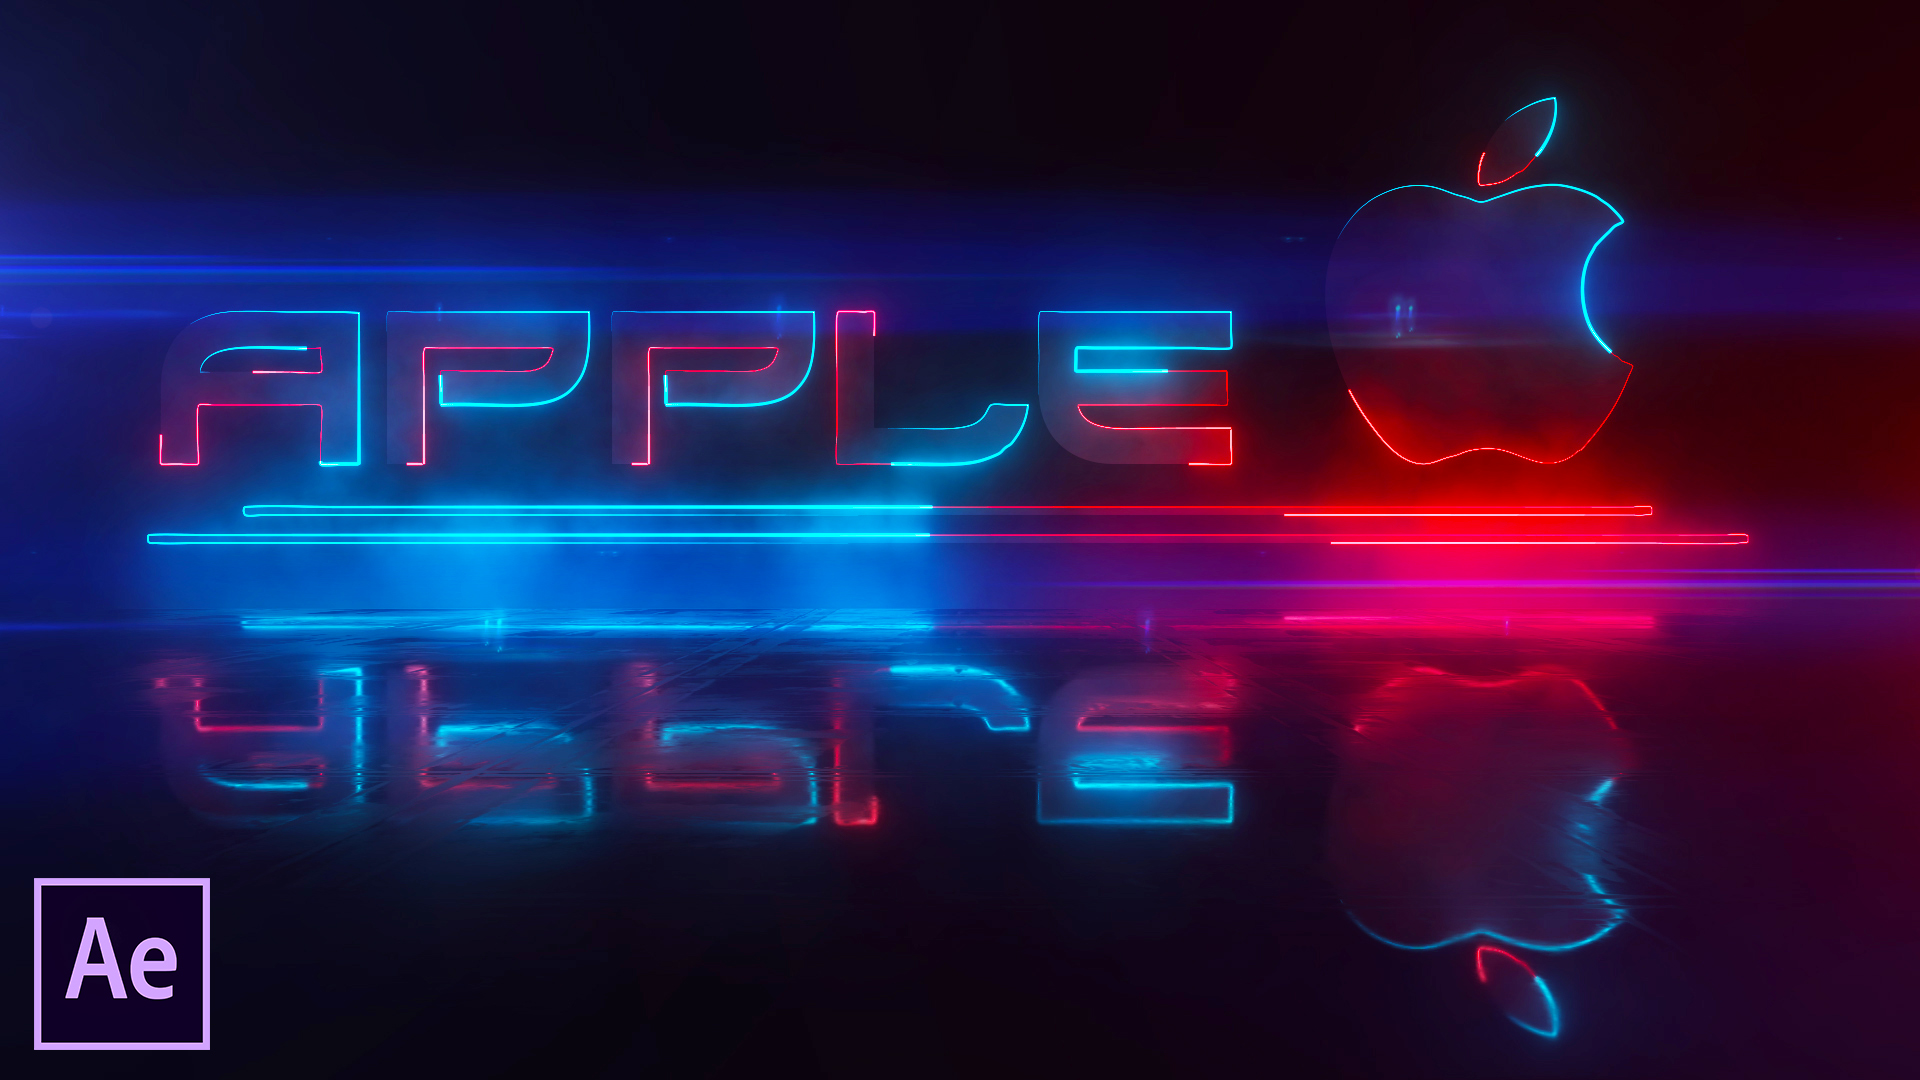 Neon Text & Logo Animation in After Effects – After Effects Tutorial – Saber Plugin